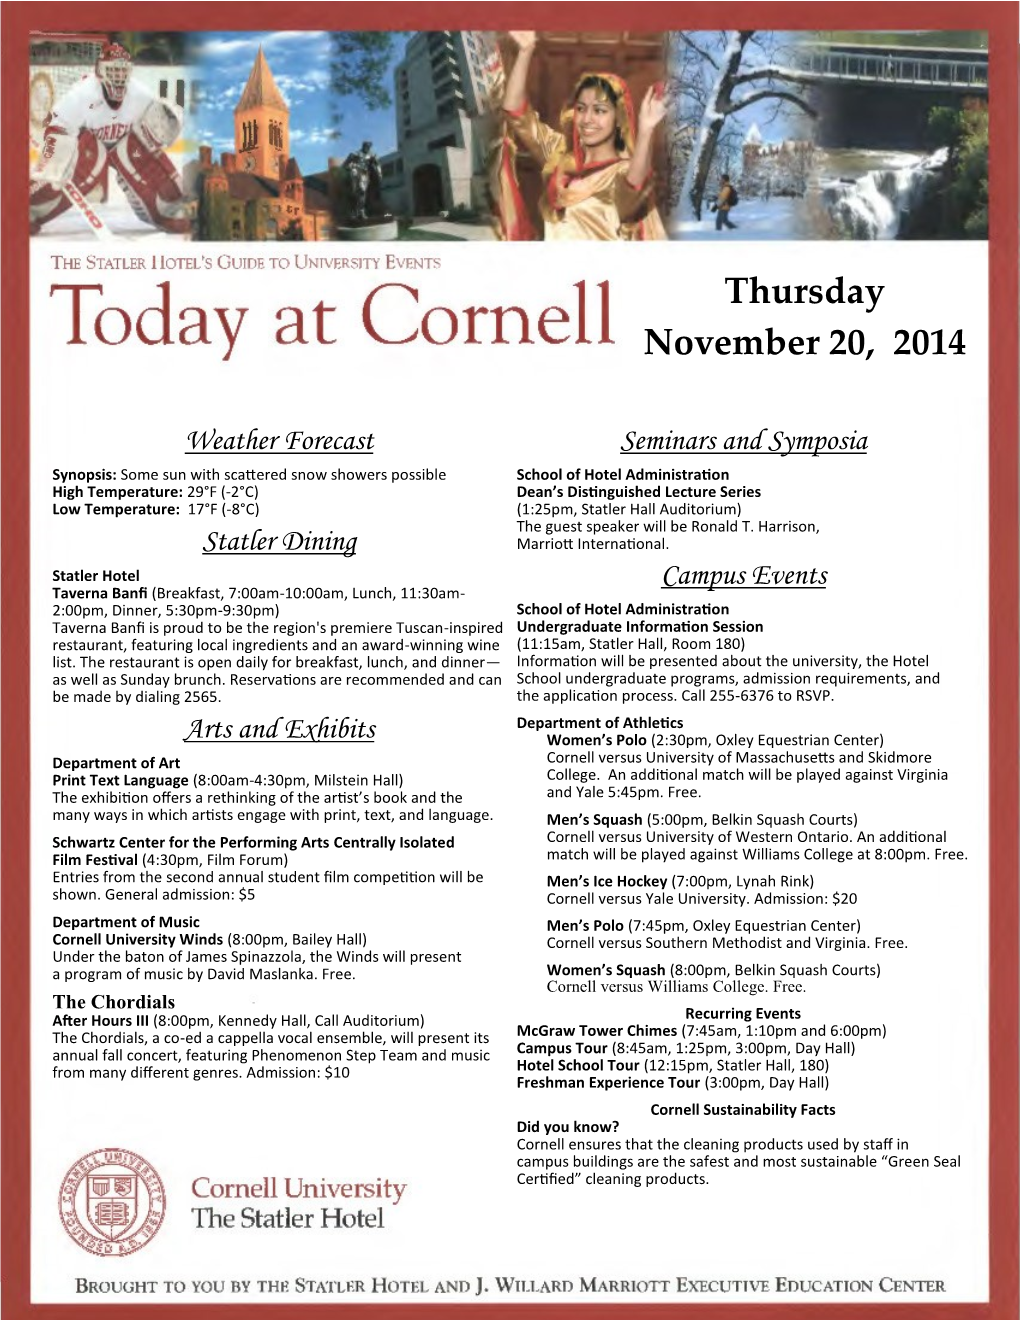 Today at Cornell